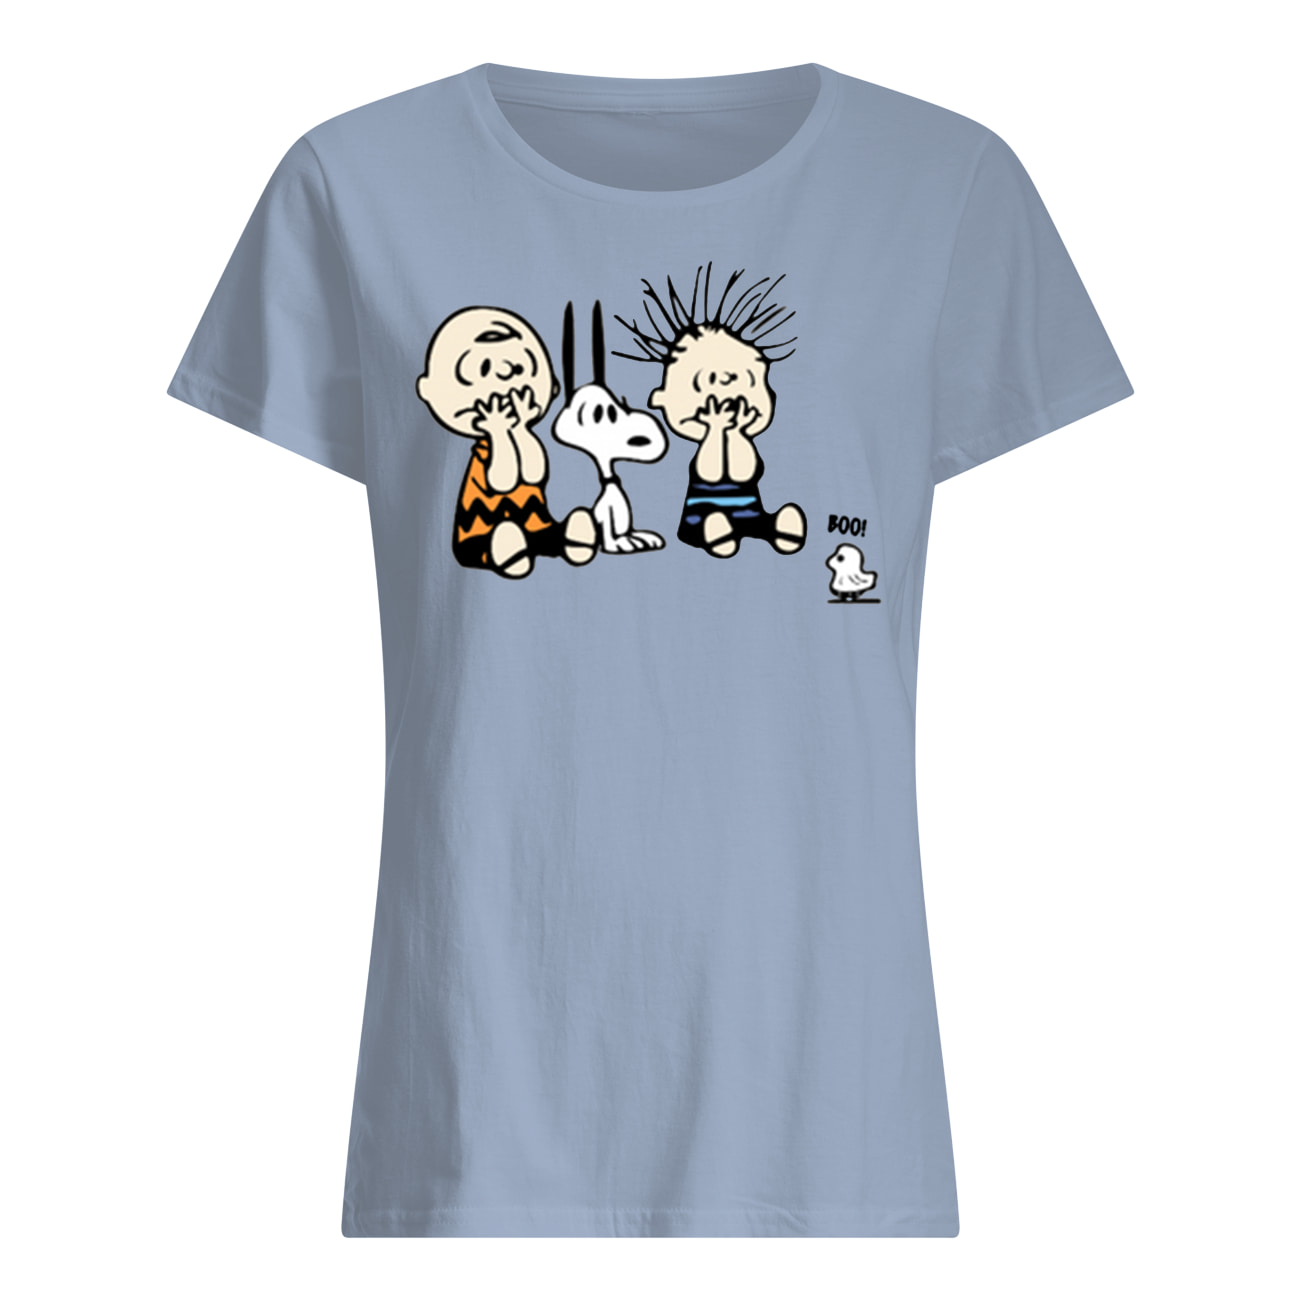 Peanuts charlie brown and snoopy halloween boo womens shirt